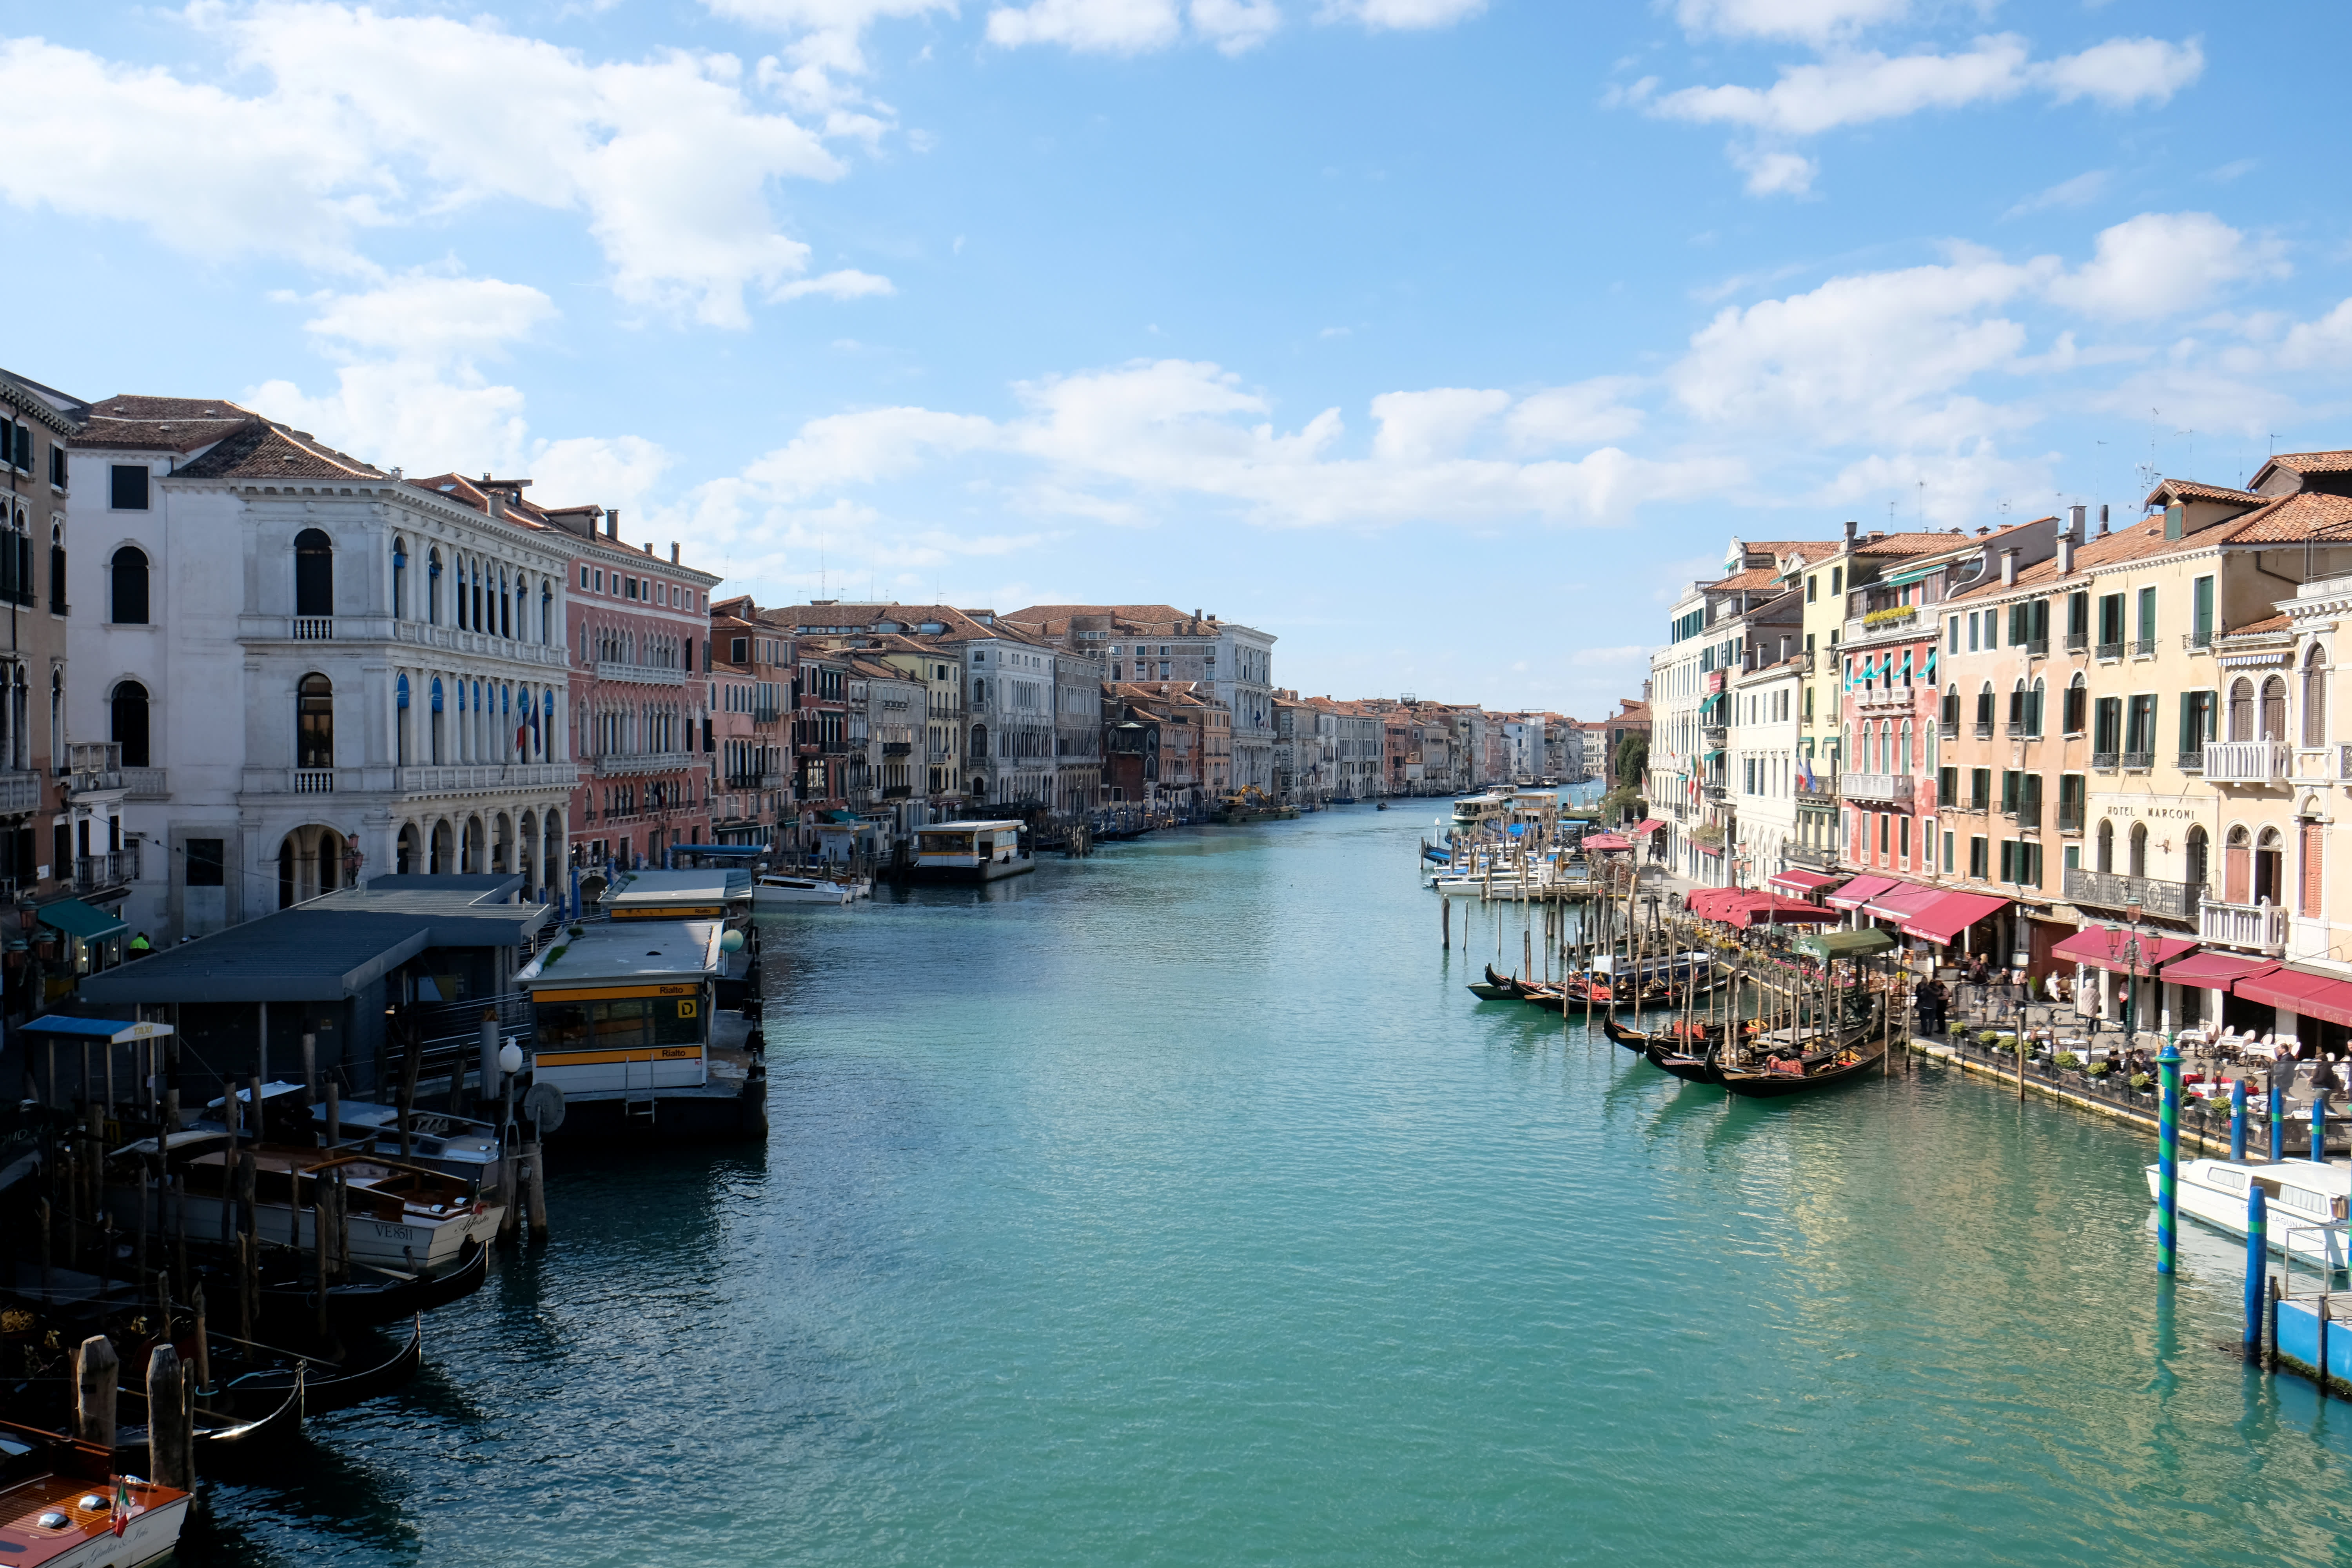 The water in Venice, Italy's canals is running clear amid the COVID-19 lockdown — take a look - CNBC